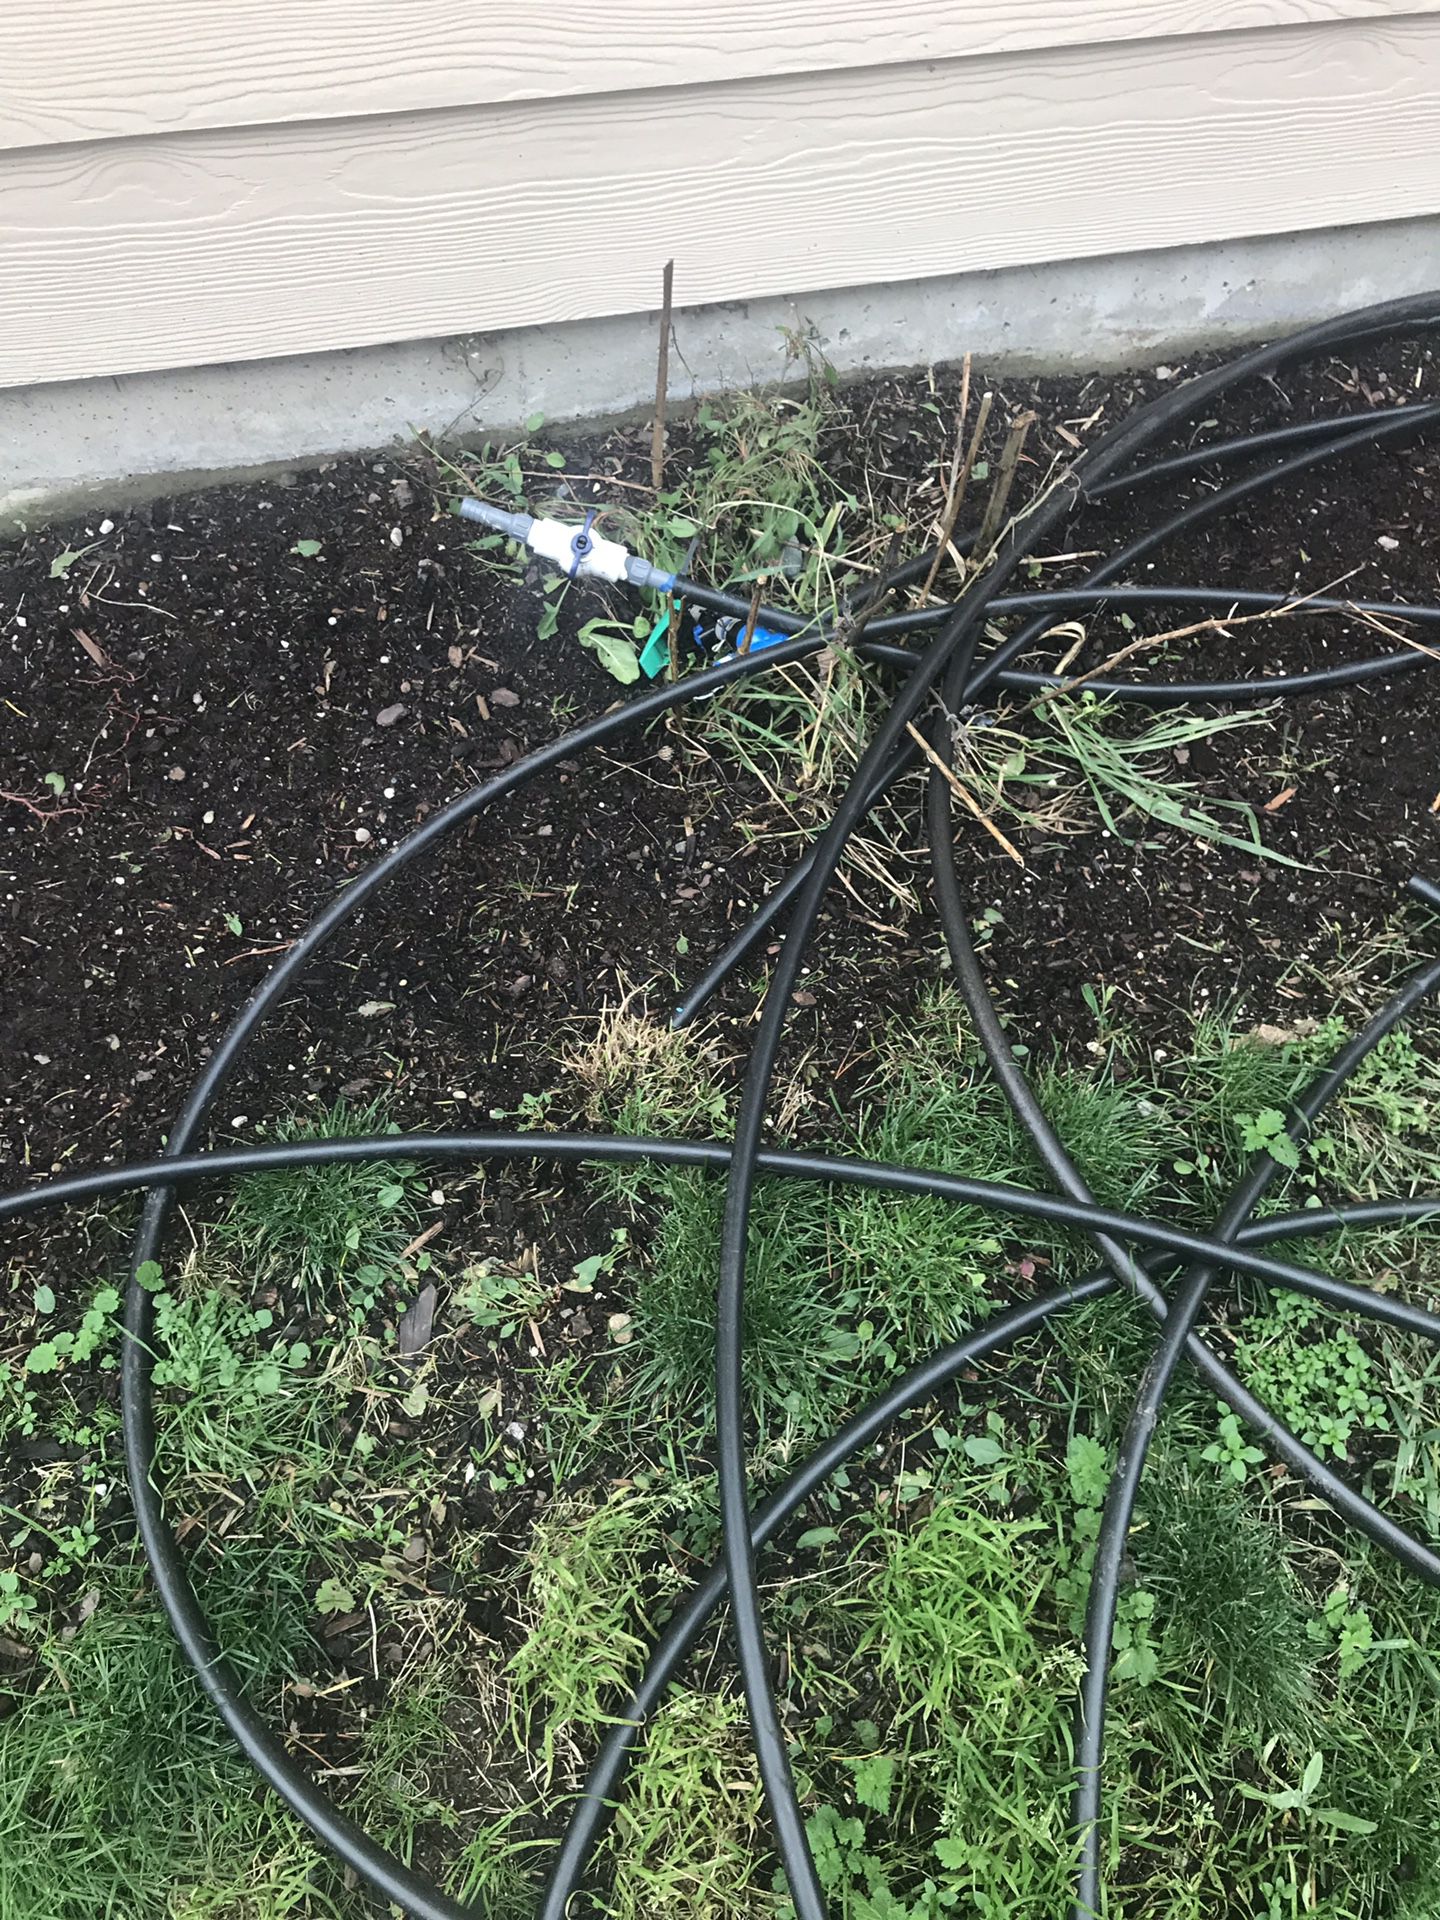 Sprinkler heads and hoses free